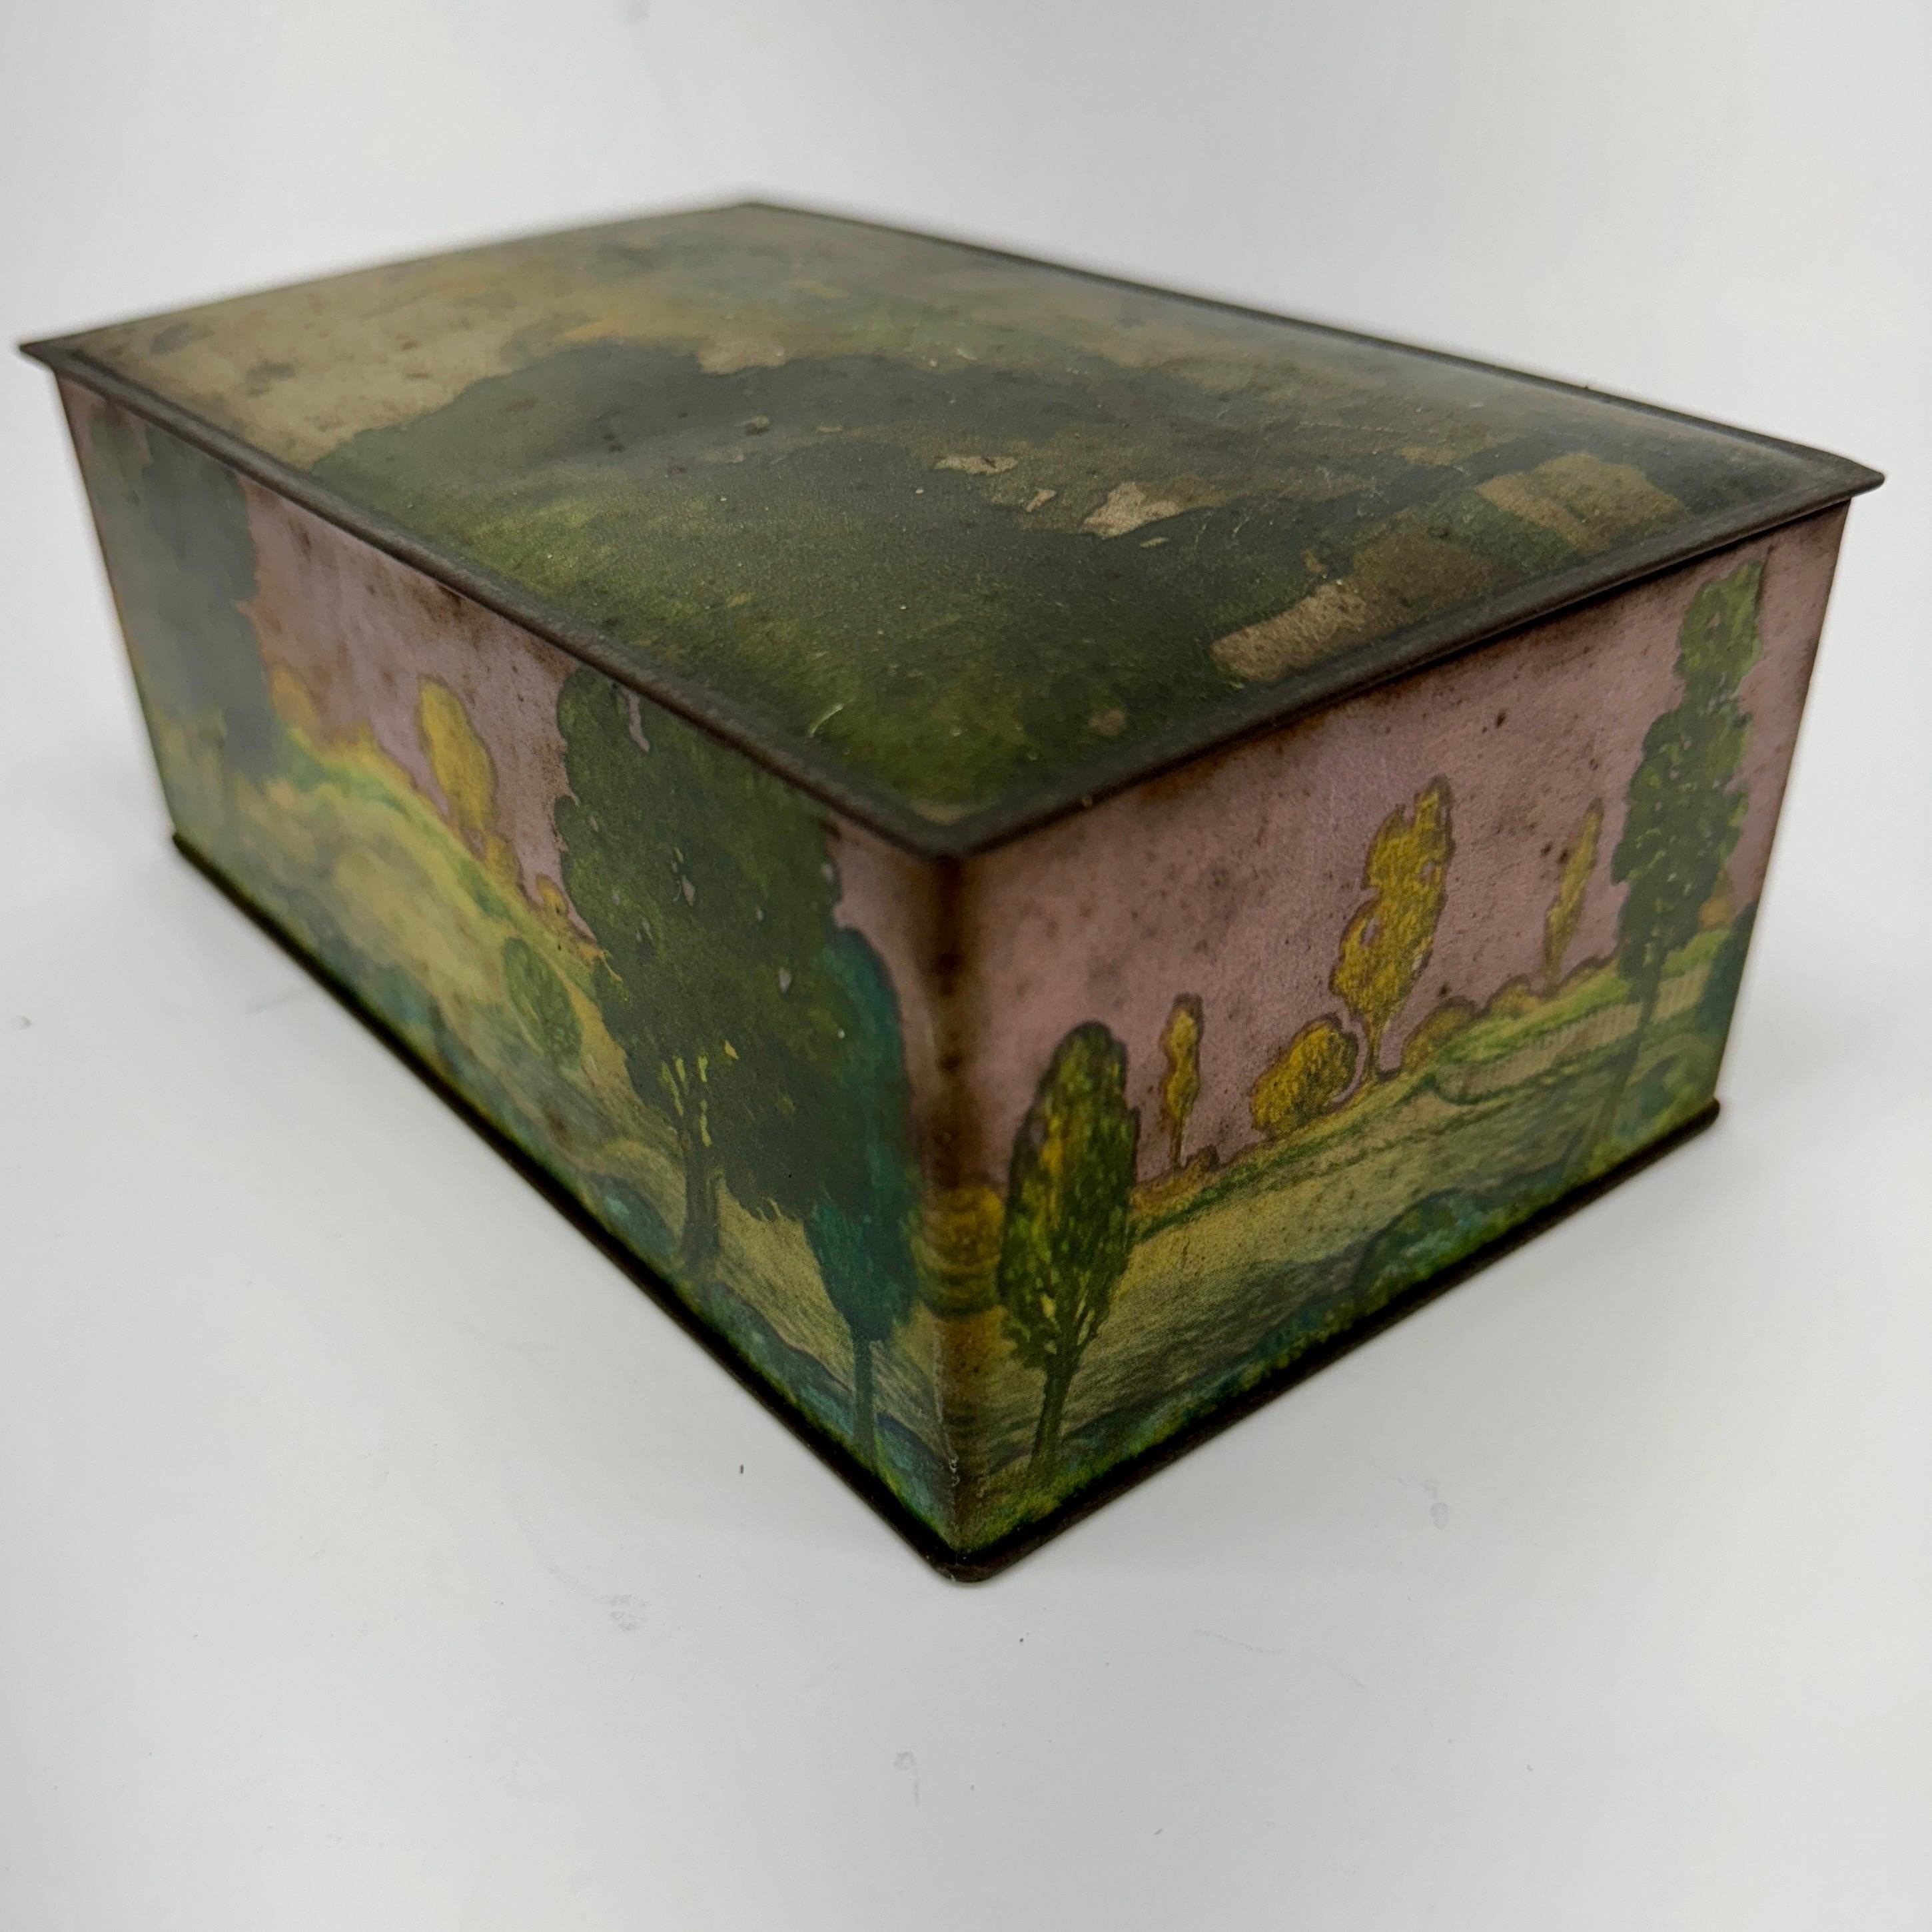 Painted Tin Rectangular Box with Landscape from Canco 1